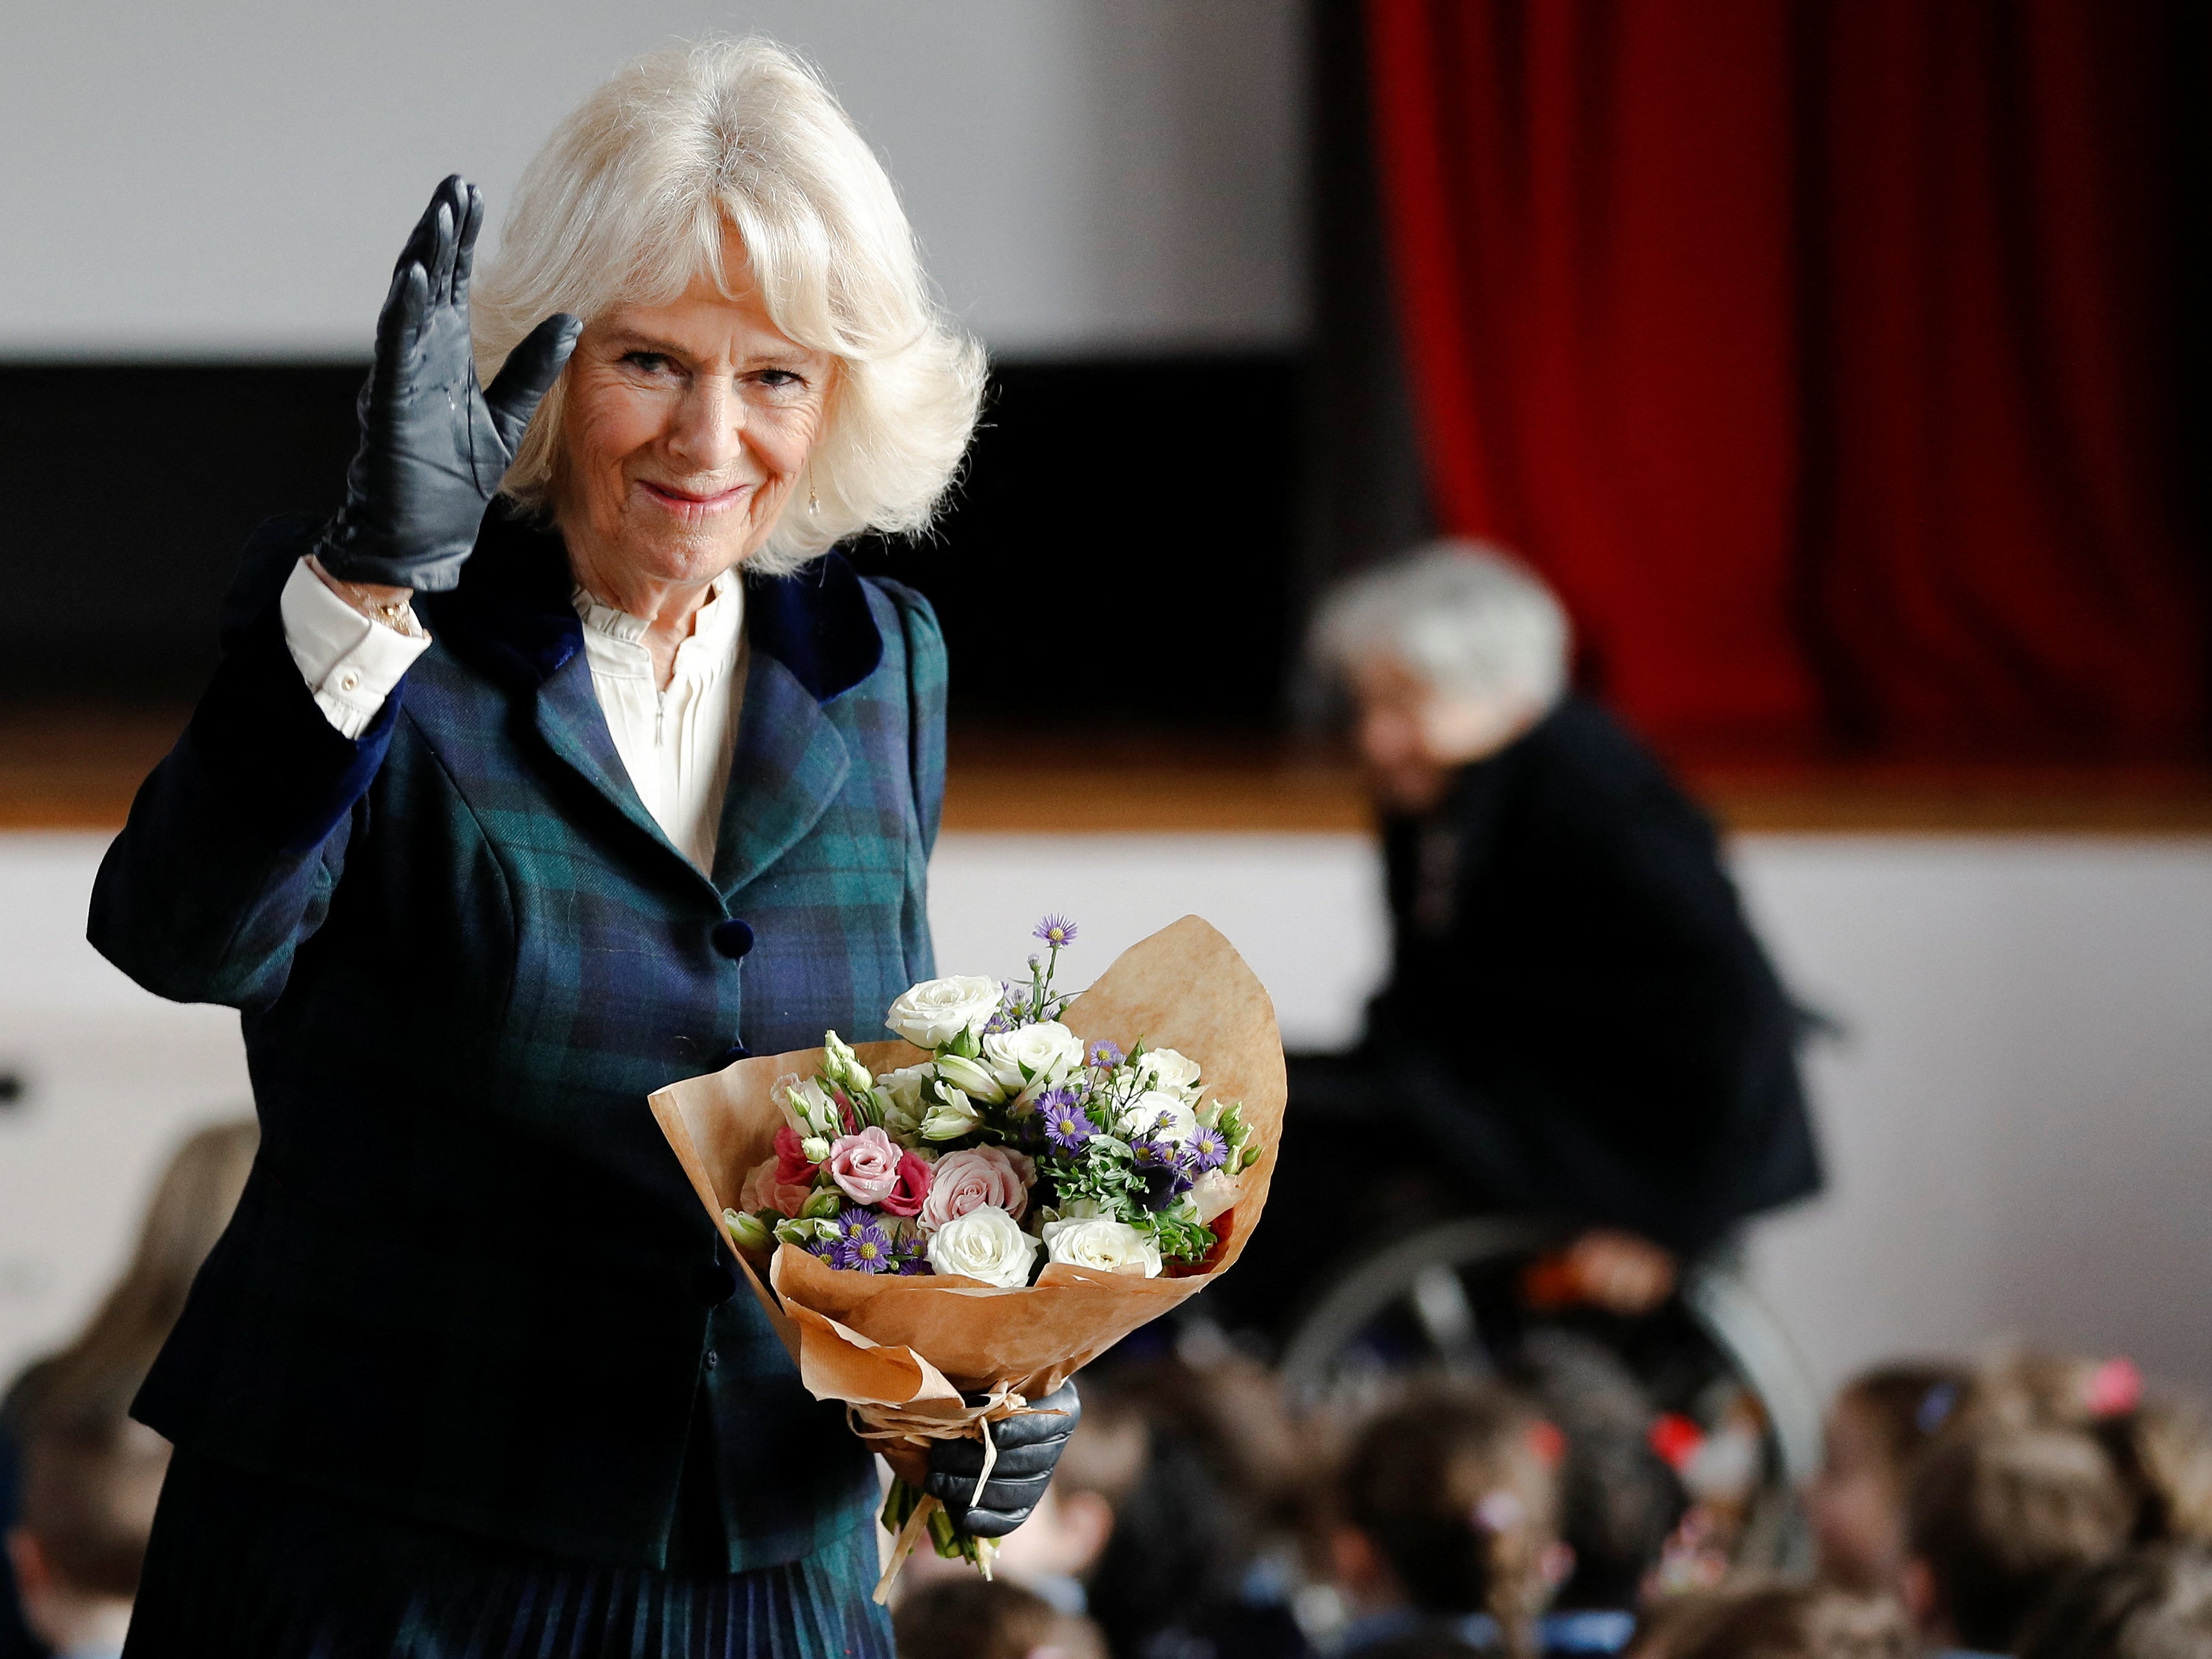 Camilla, Duchess of Cornwall, gestures during her visit to the Roundhill Primary School in Bath